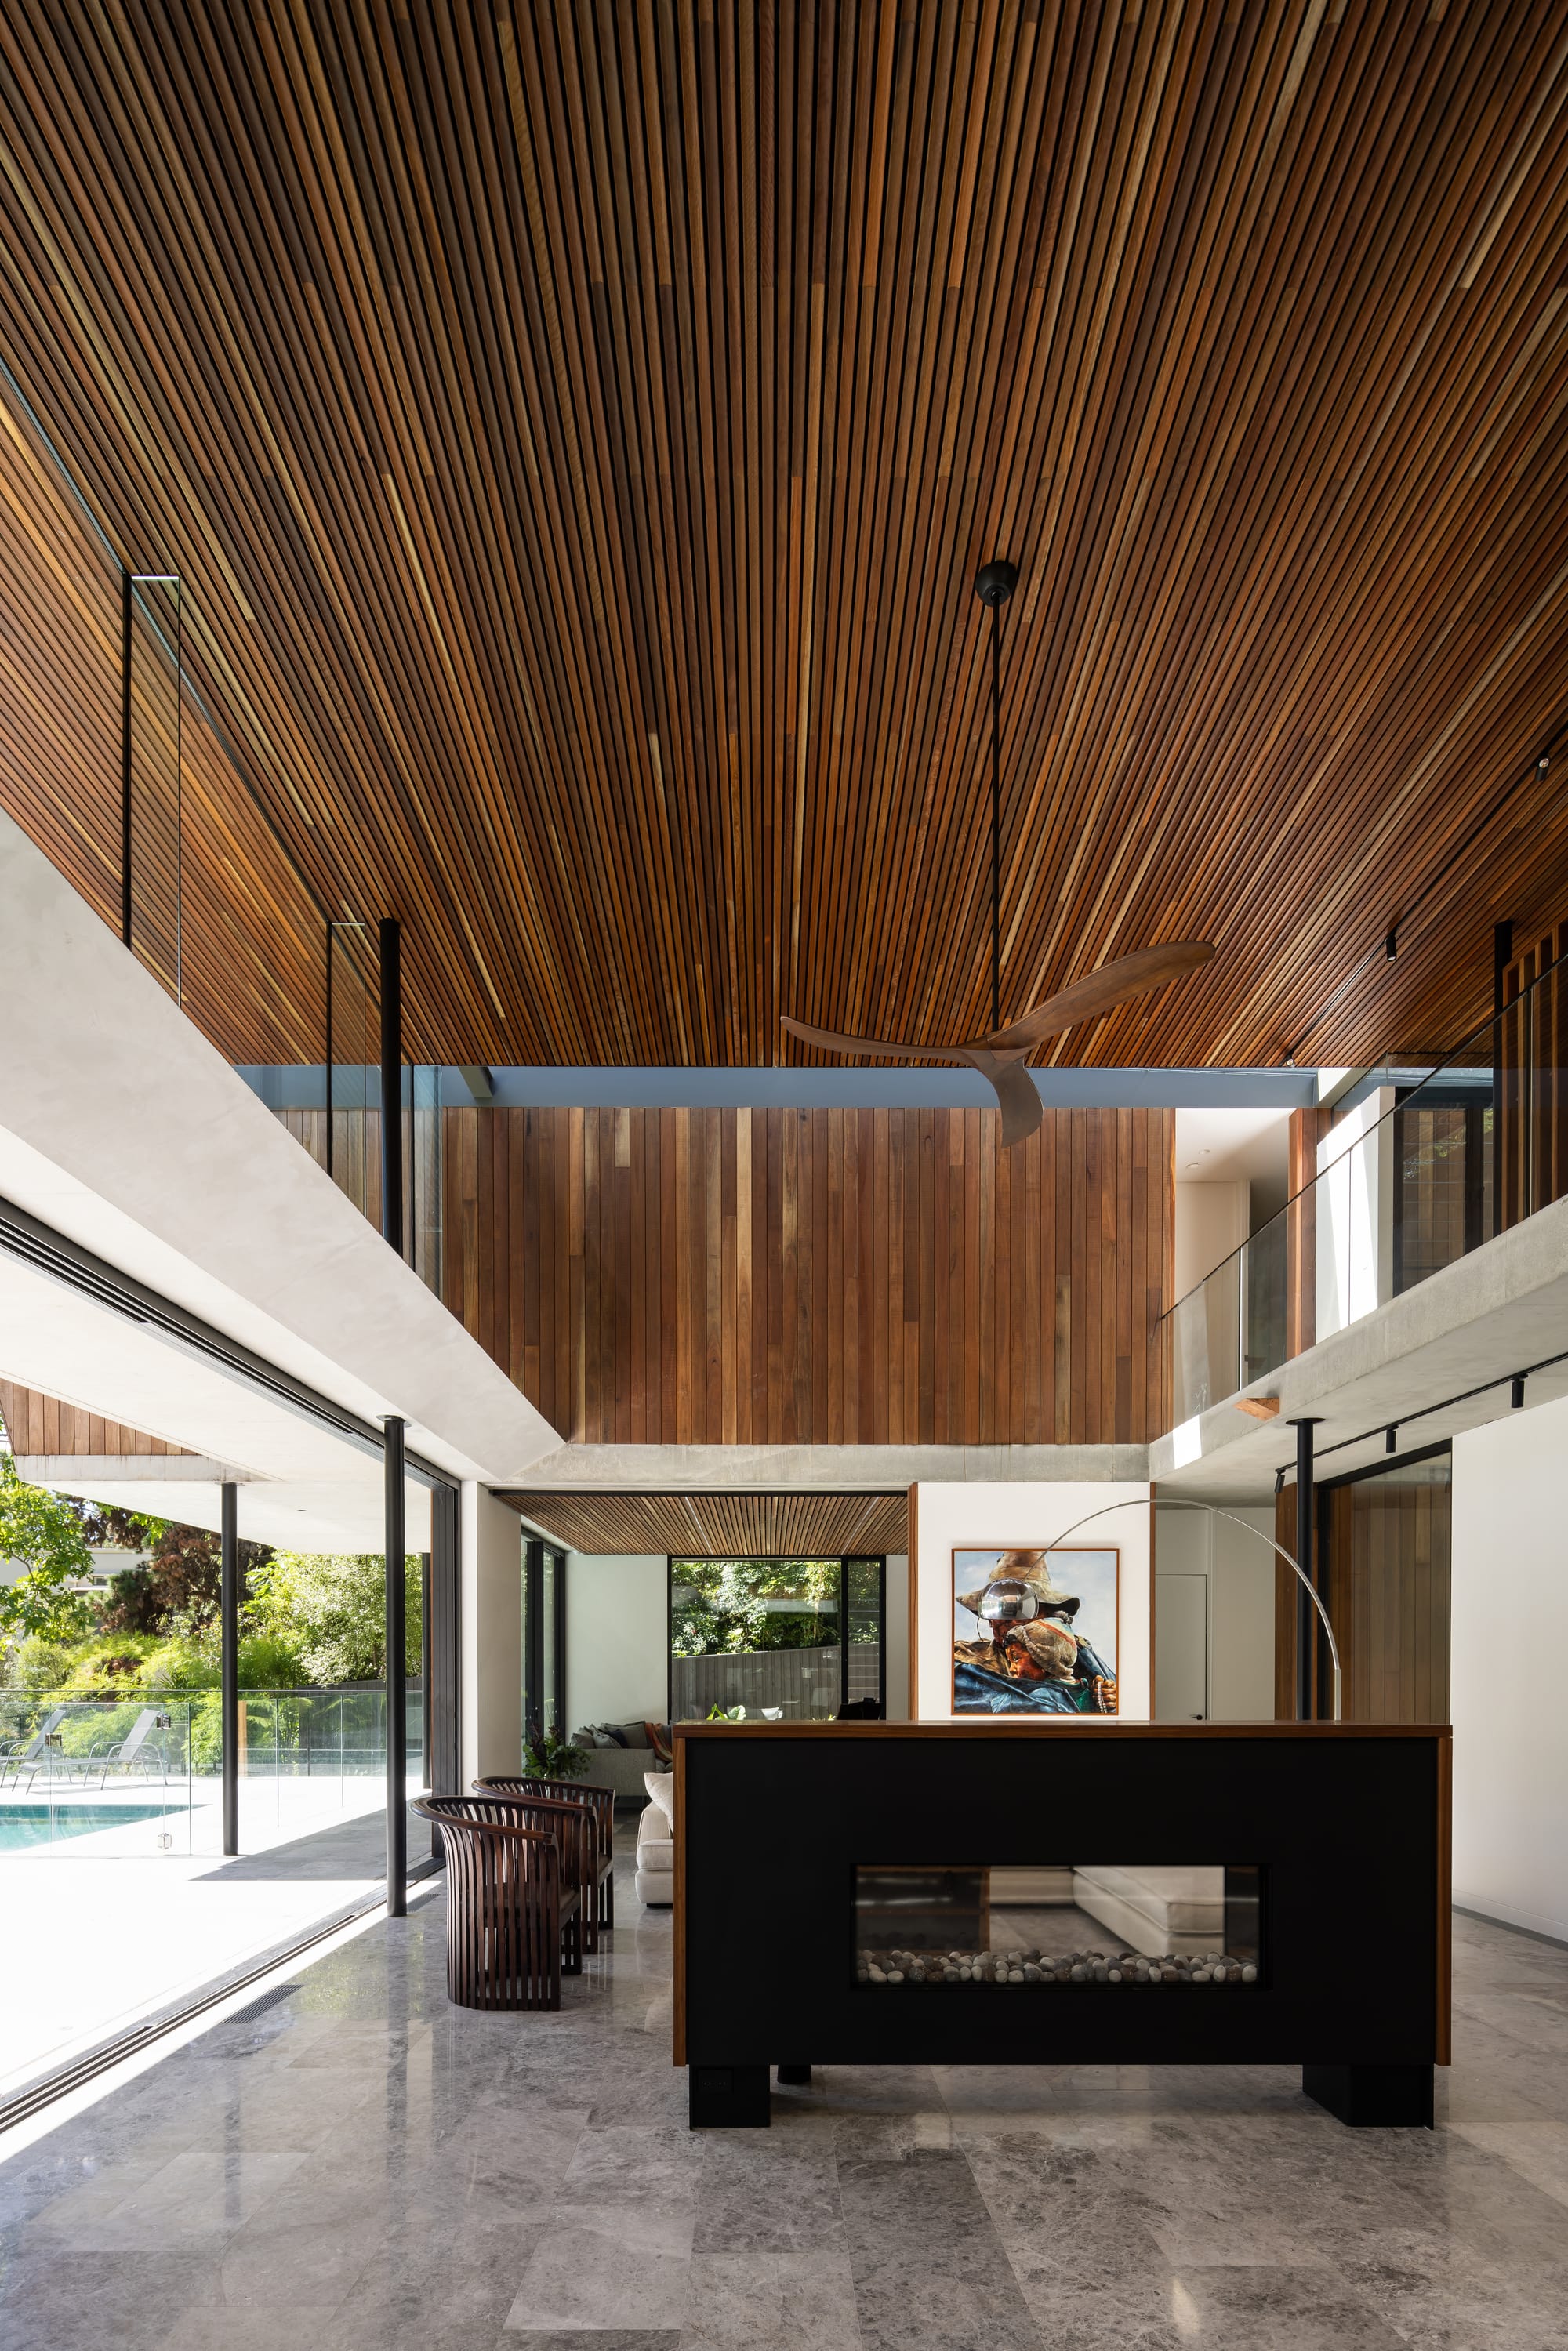 Mortlock Timbers Series: Fox Valley House. Photography by Simon Whitbread. Double heigh living space with floor-to-ceiling glass windows overlooking verandah and pool to the left. Timber clad walls and ceiling on second floor. 